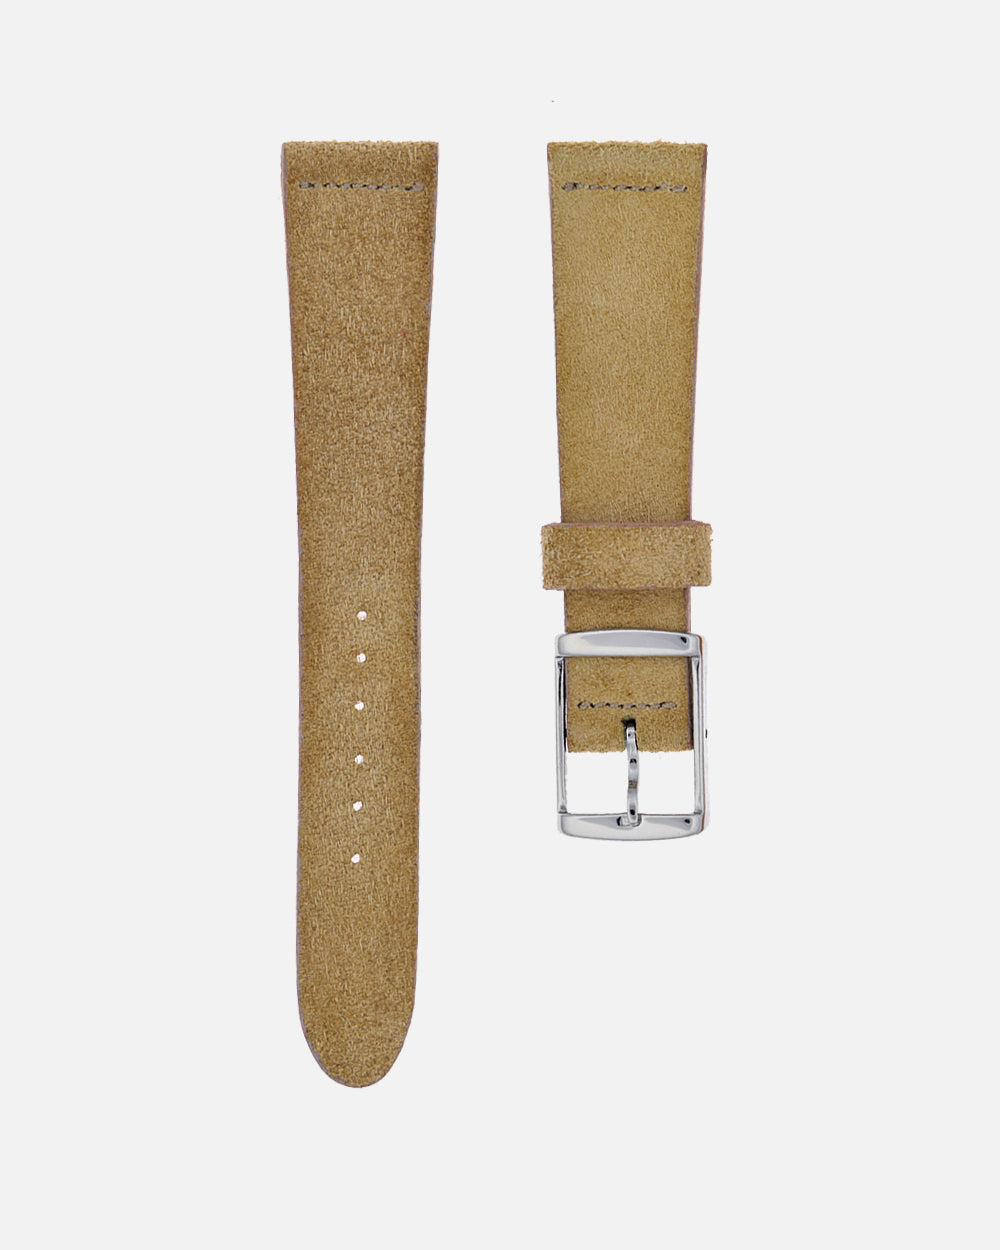 Suede Leather Watch Straps: A Unique and Stylish Option